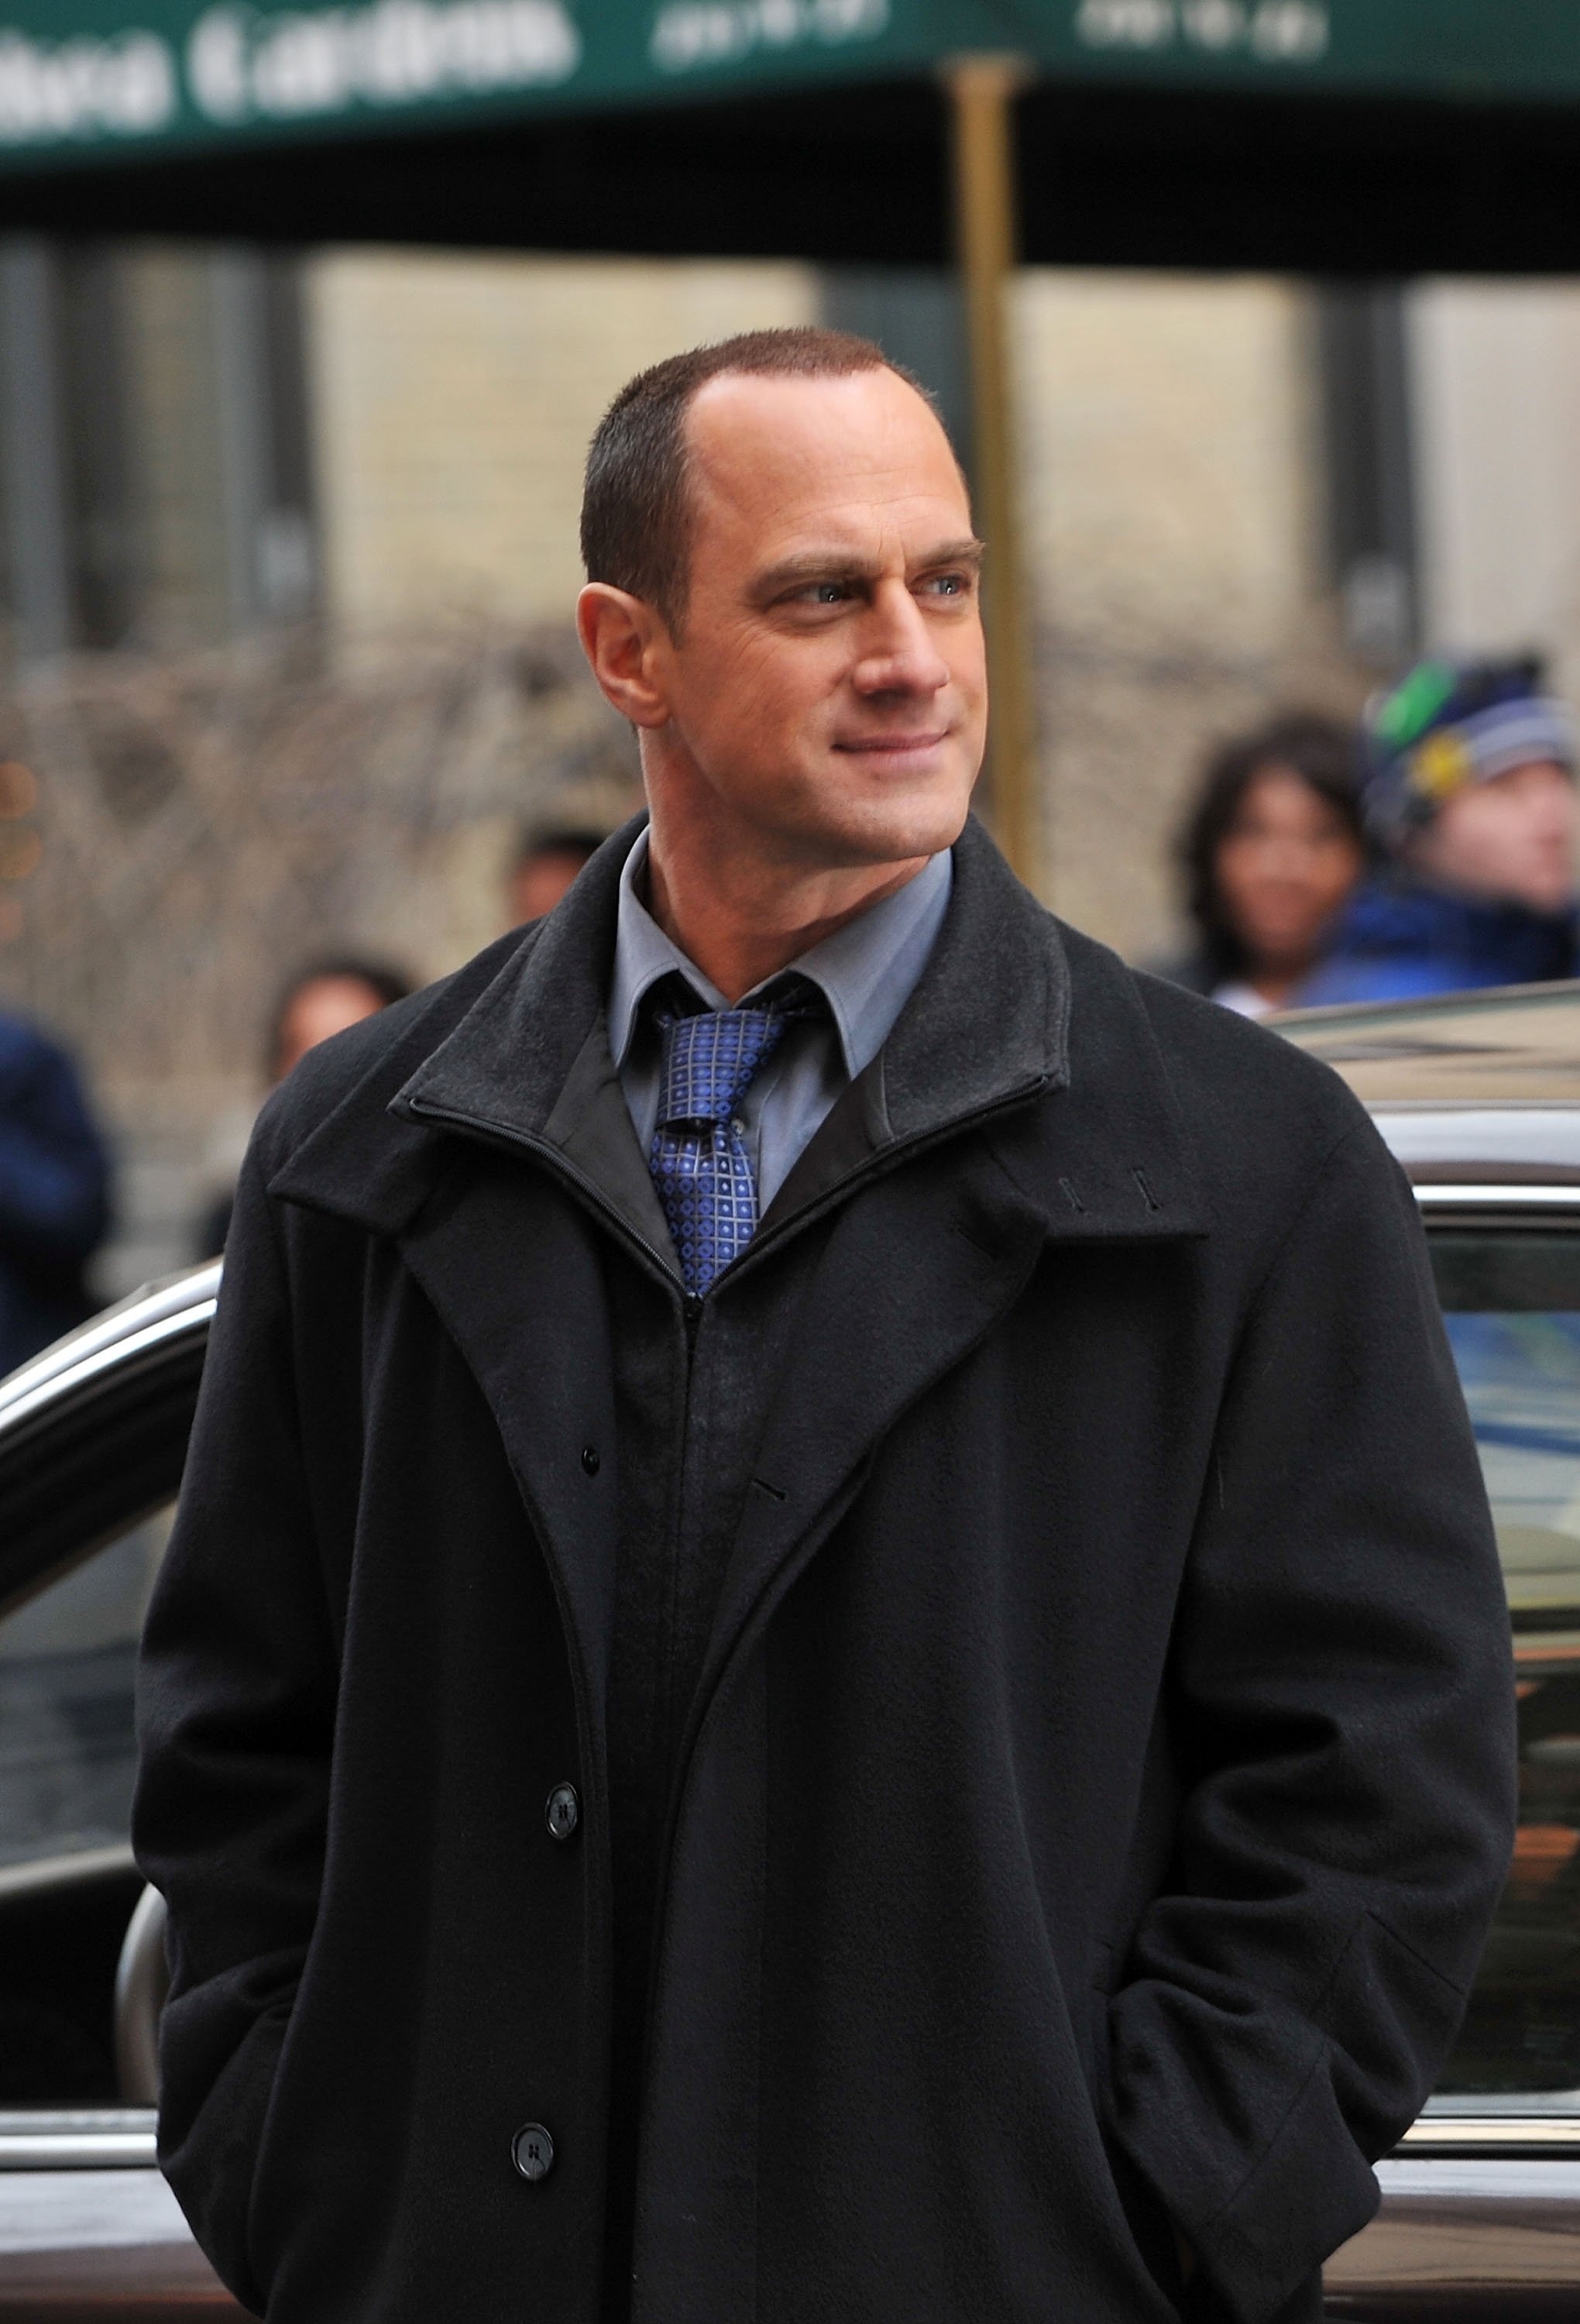  Christopher Meloni on location for "Law & Order: SVU" on the streets of Manhattan on January 26, 2010. | Photo: Getty Images